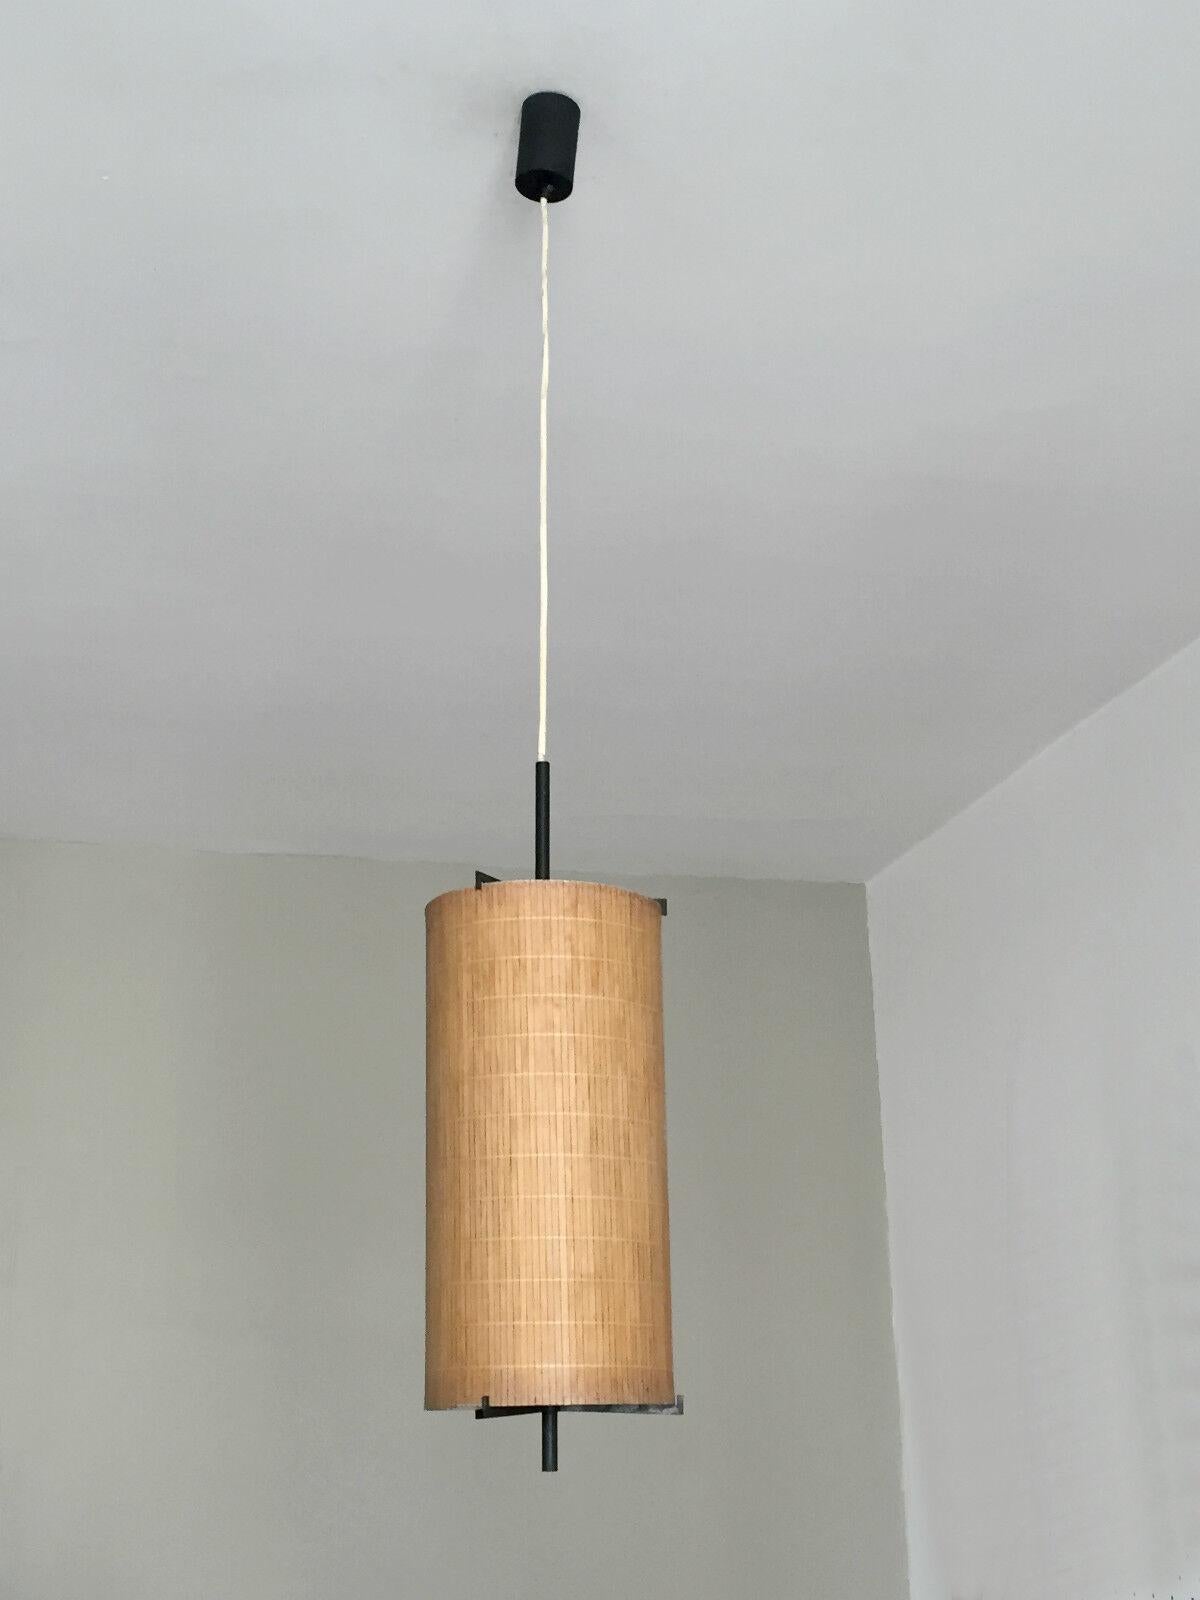 Metal A MID-CENTURY-MODERN MODERNIST Ceiling Fixture LAMP by MAISON ARLUS, France 1950 For Sale